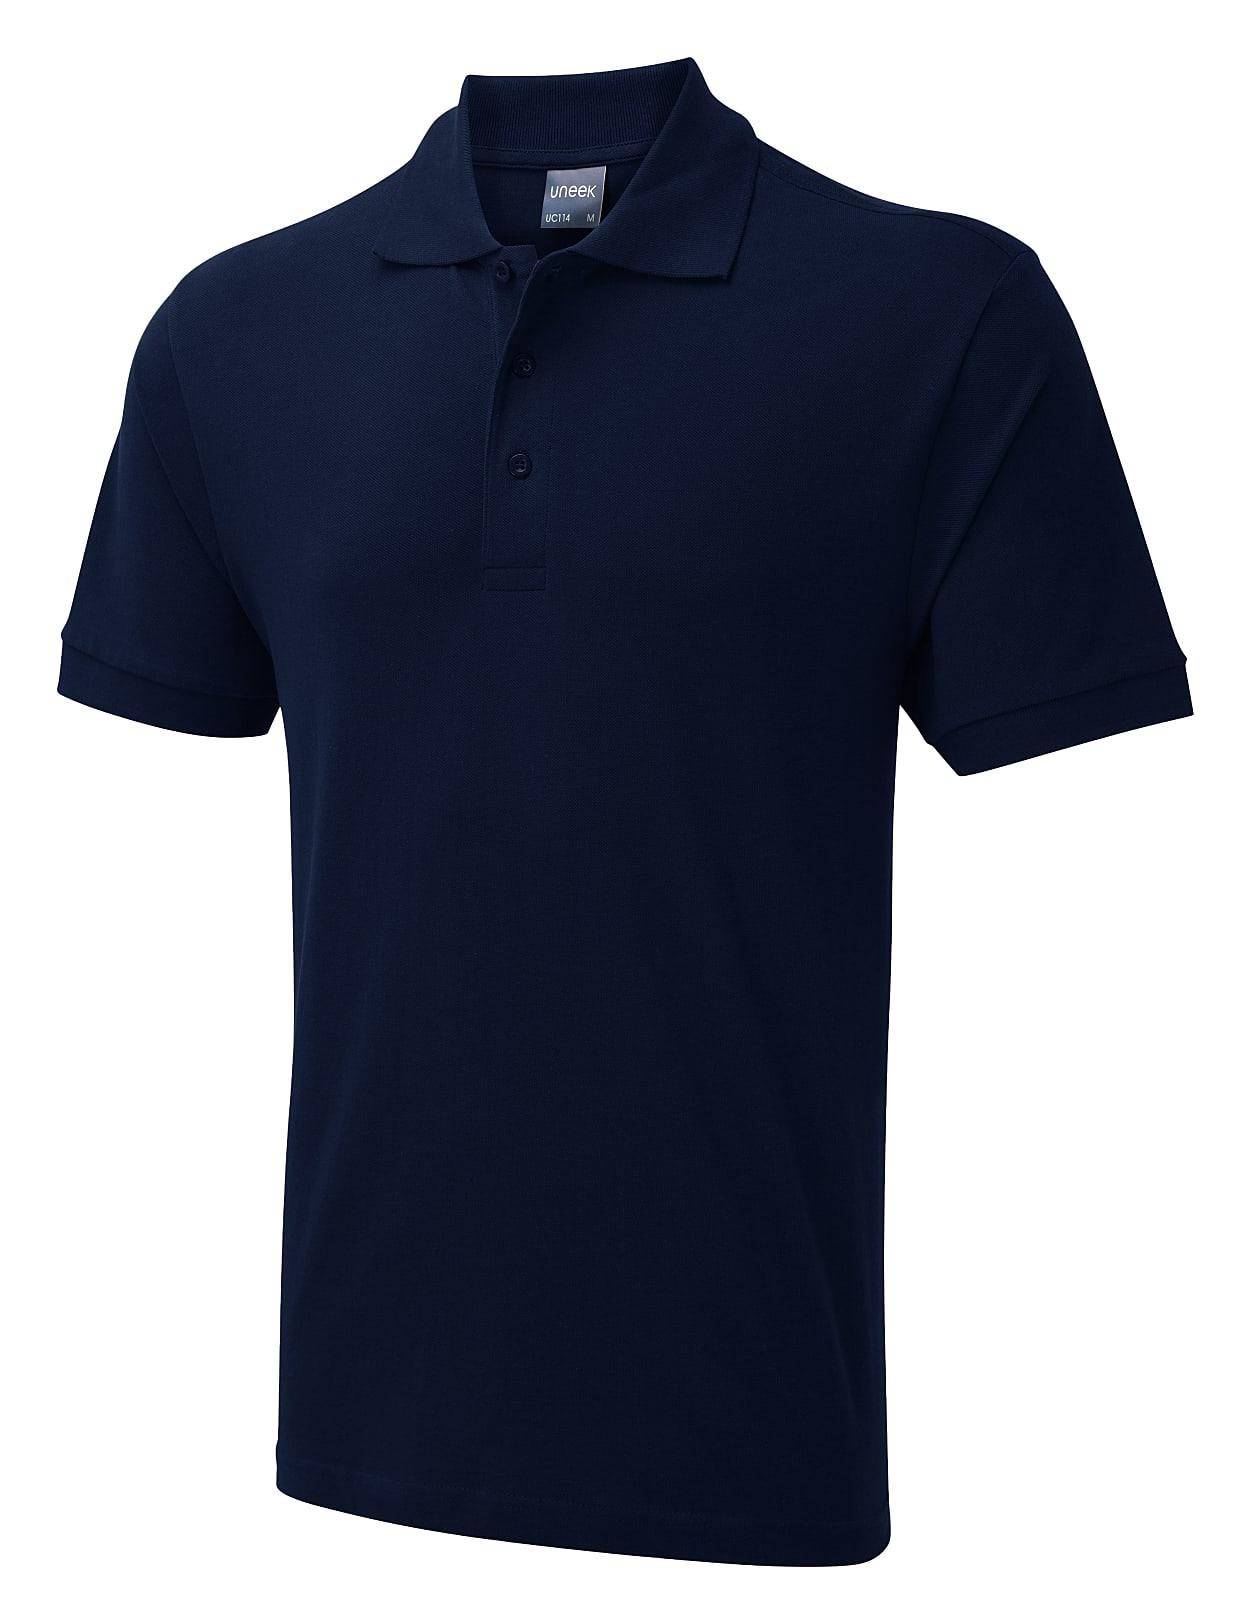 Uneek 180GSM Mens Polo Shirt in French Navy (Product Code: UC114)